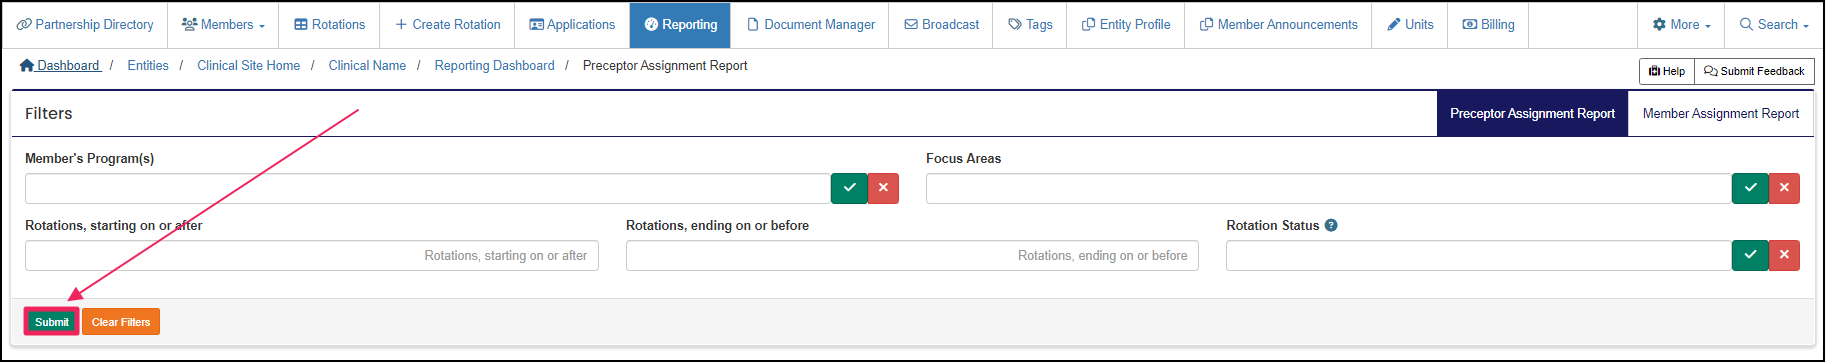 report filters section pointing to Submit button